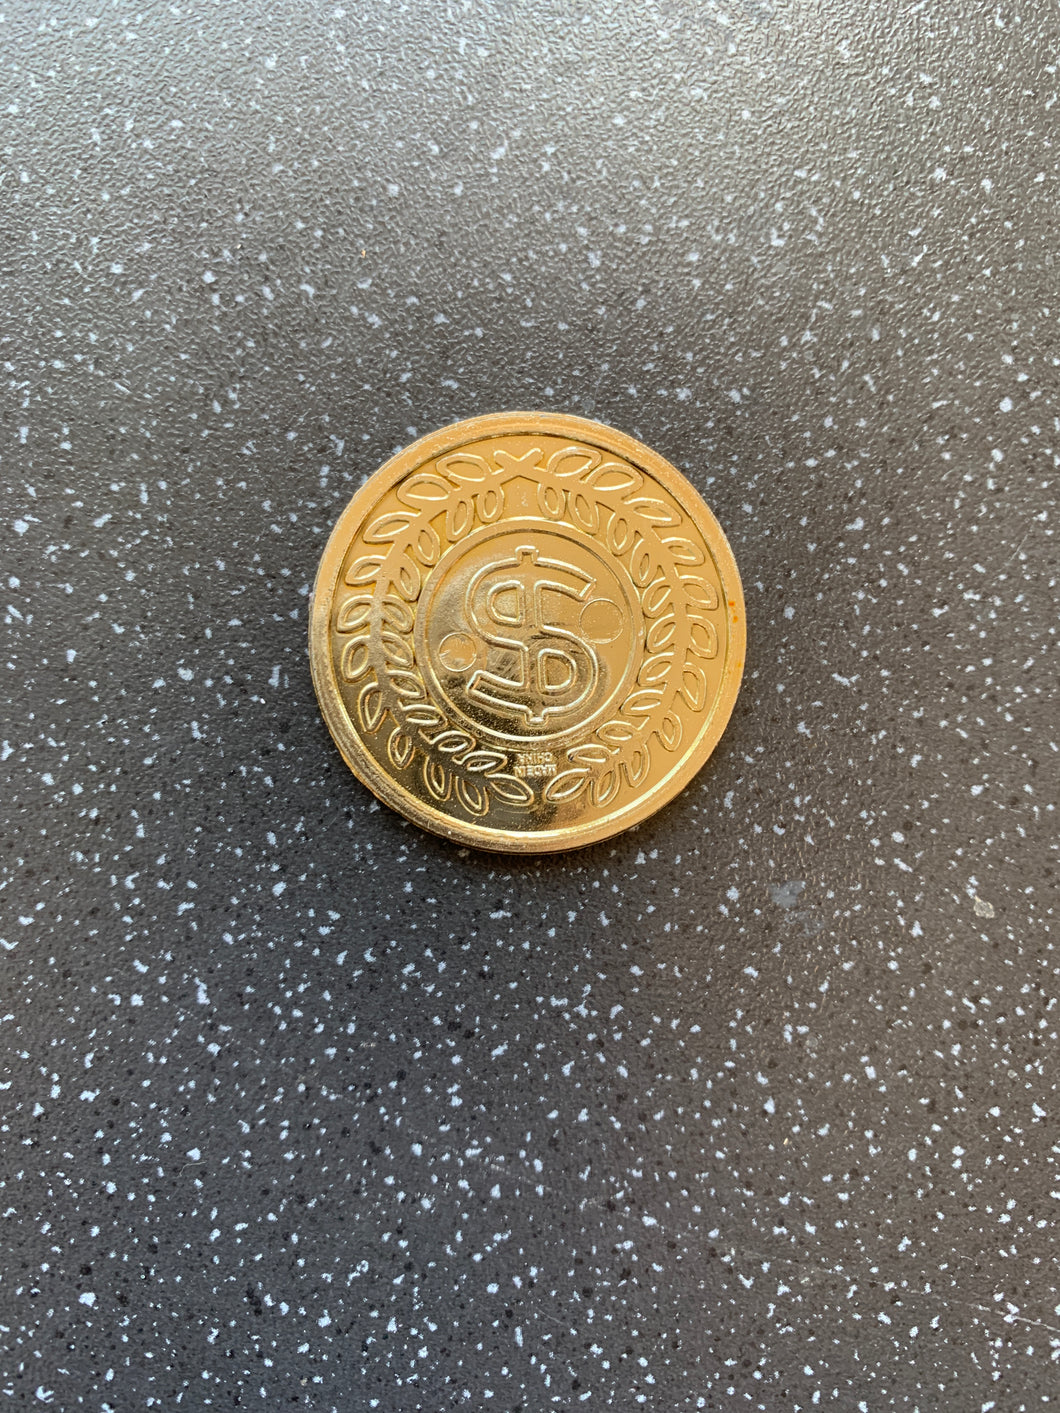 Manifest Wealth and Money Coin Charm Gold For Wallet or Under Pillow for Success, Money and Stability Law of attraction